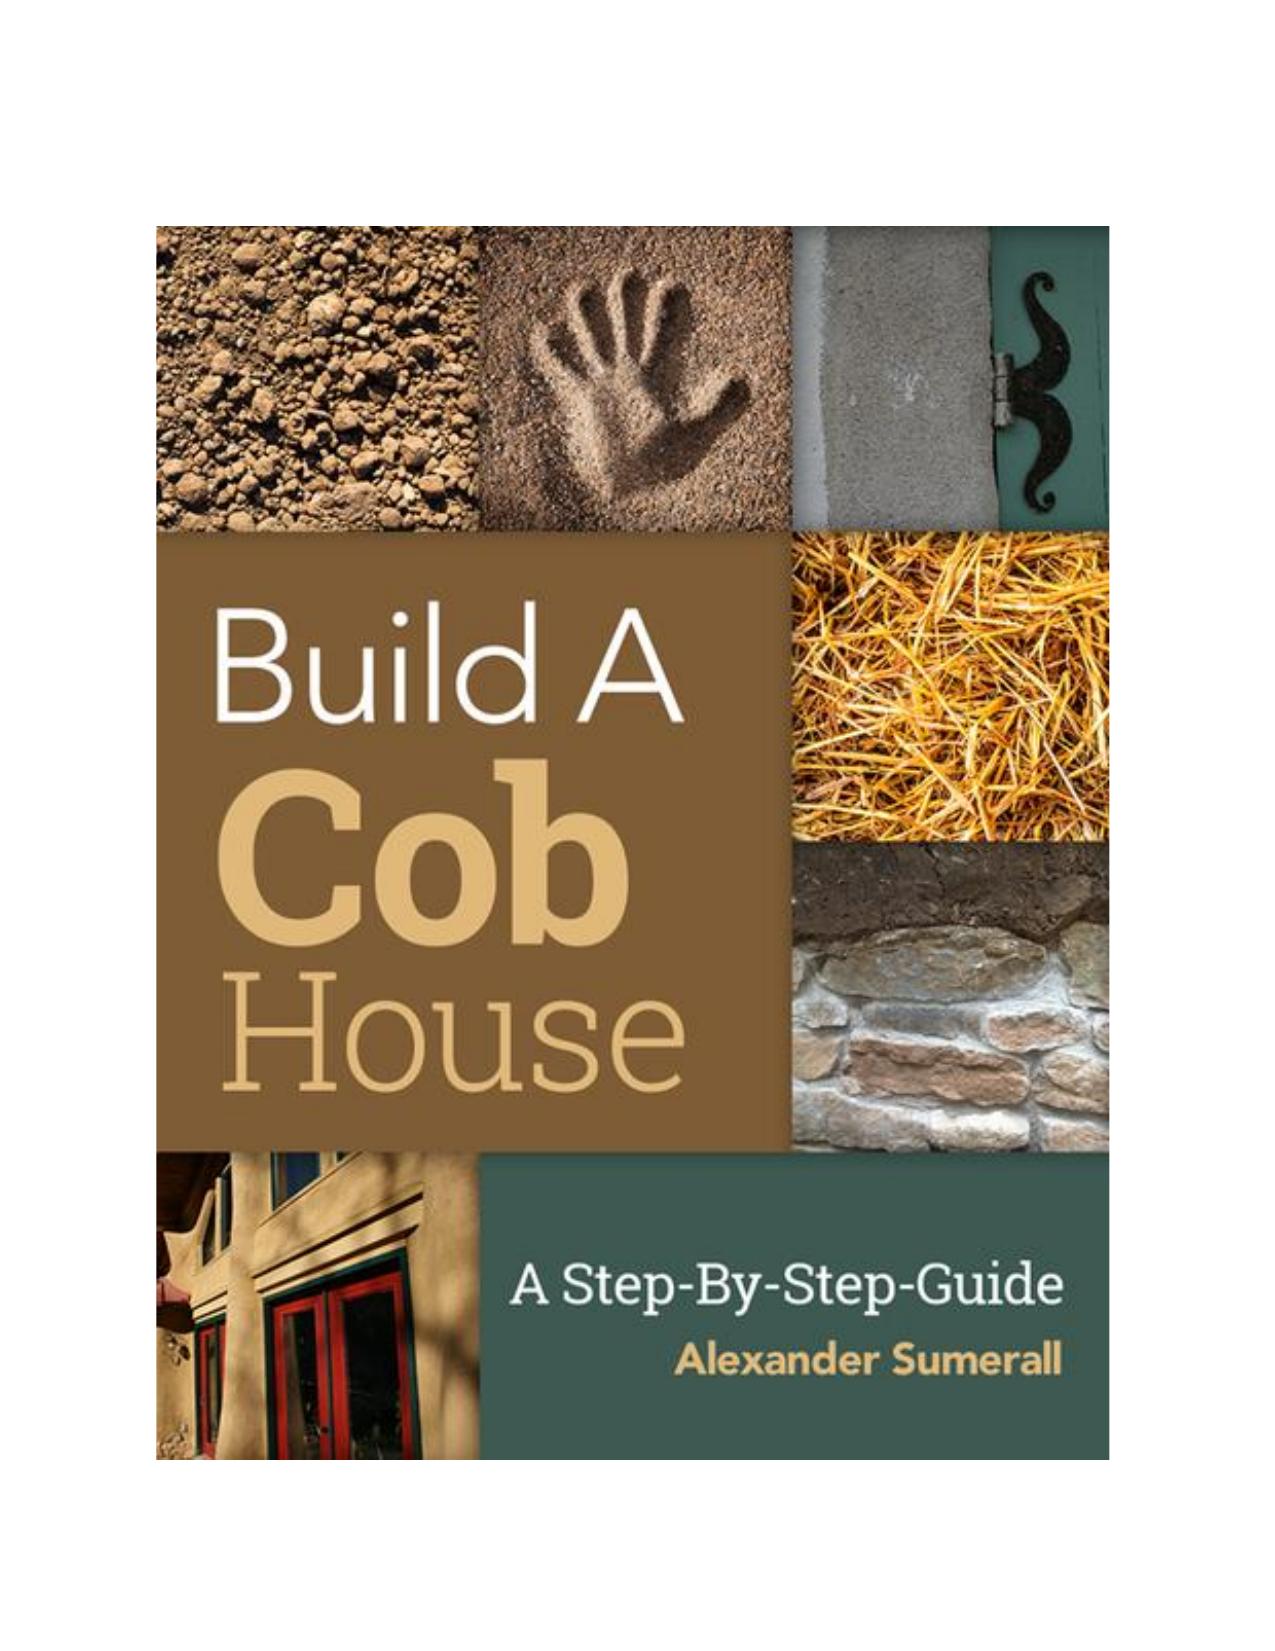 Build a cob house by Alexander Sumerall